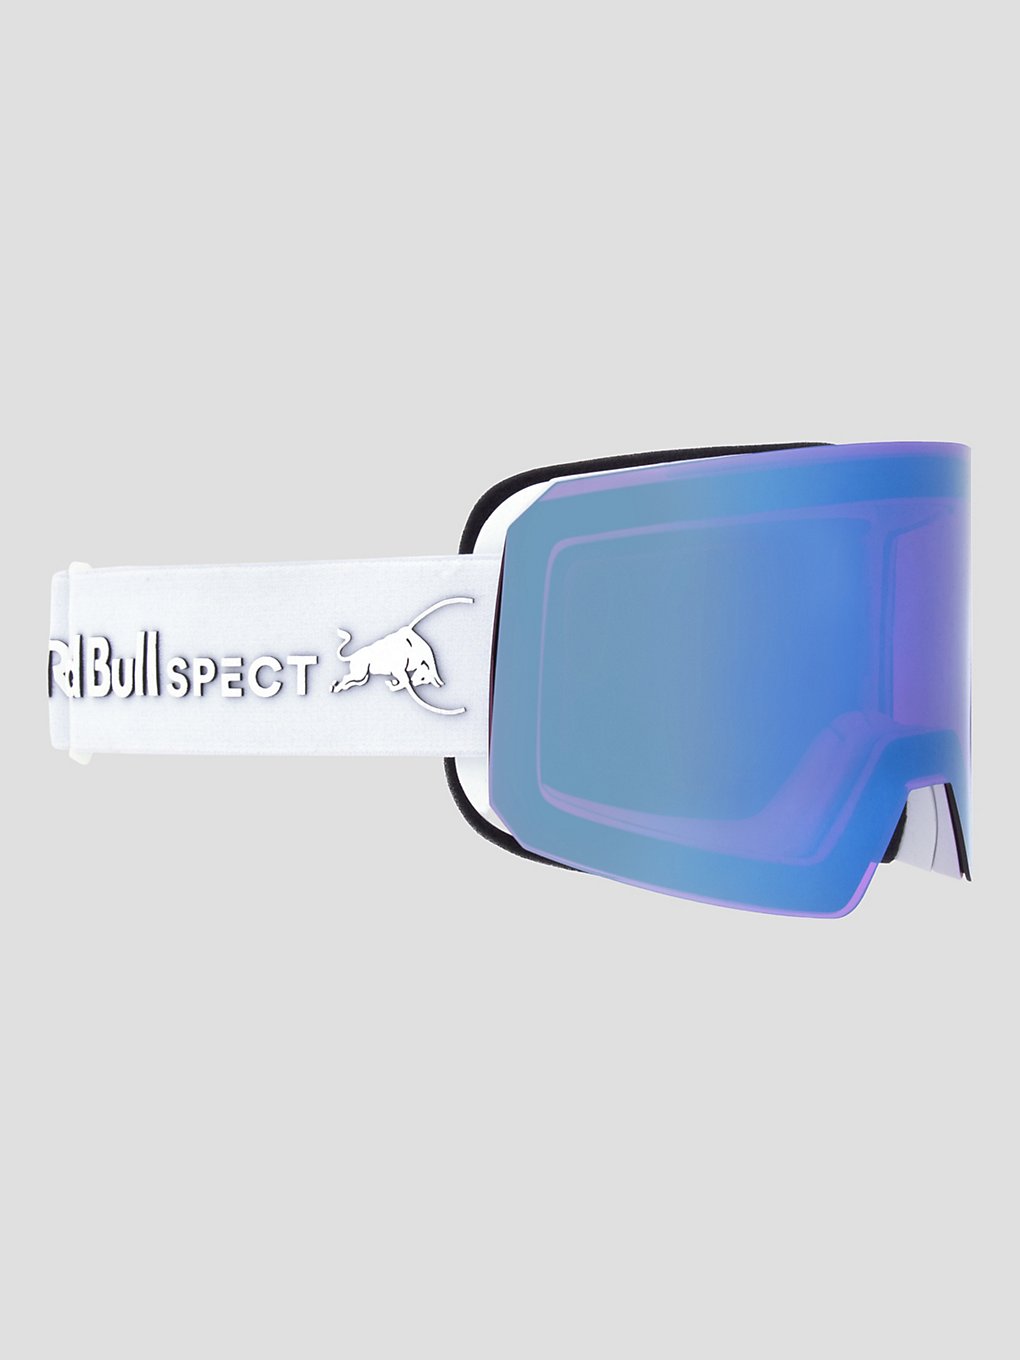 Red Bull SPECT Eyewear REIGN-03 wit Skibril wit